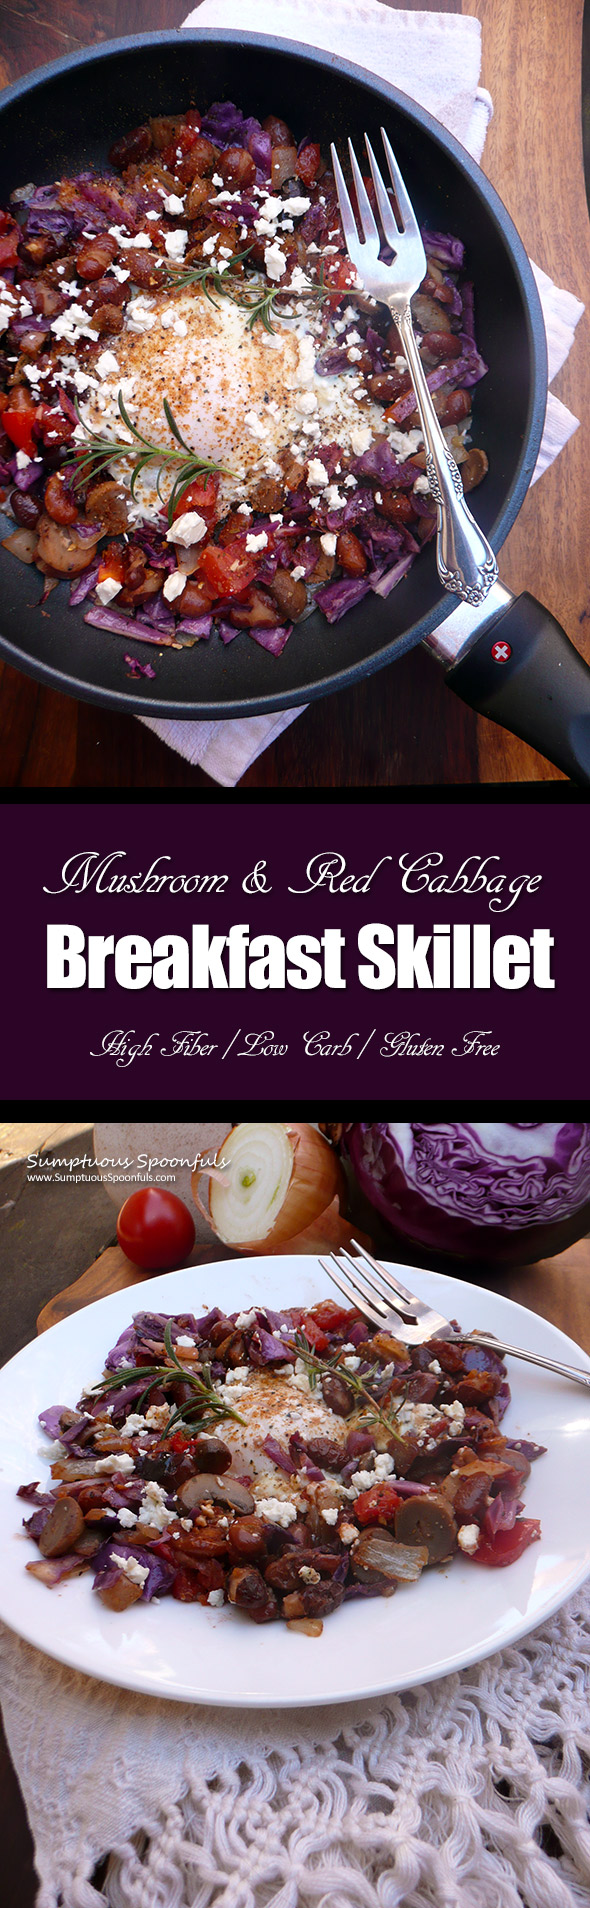 Mushroom & Red Cabbage Breakfast Skillet ~ a low carb, high fiber breakfast that is full of flavor, color and will keep you full and satisfied all morning long. Ready in 15 - 20 minutes!